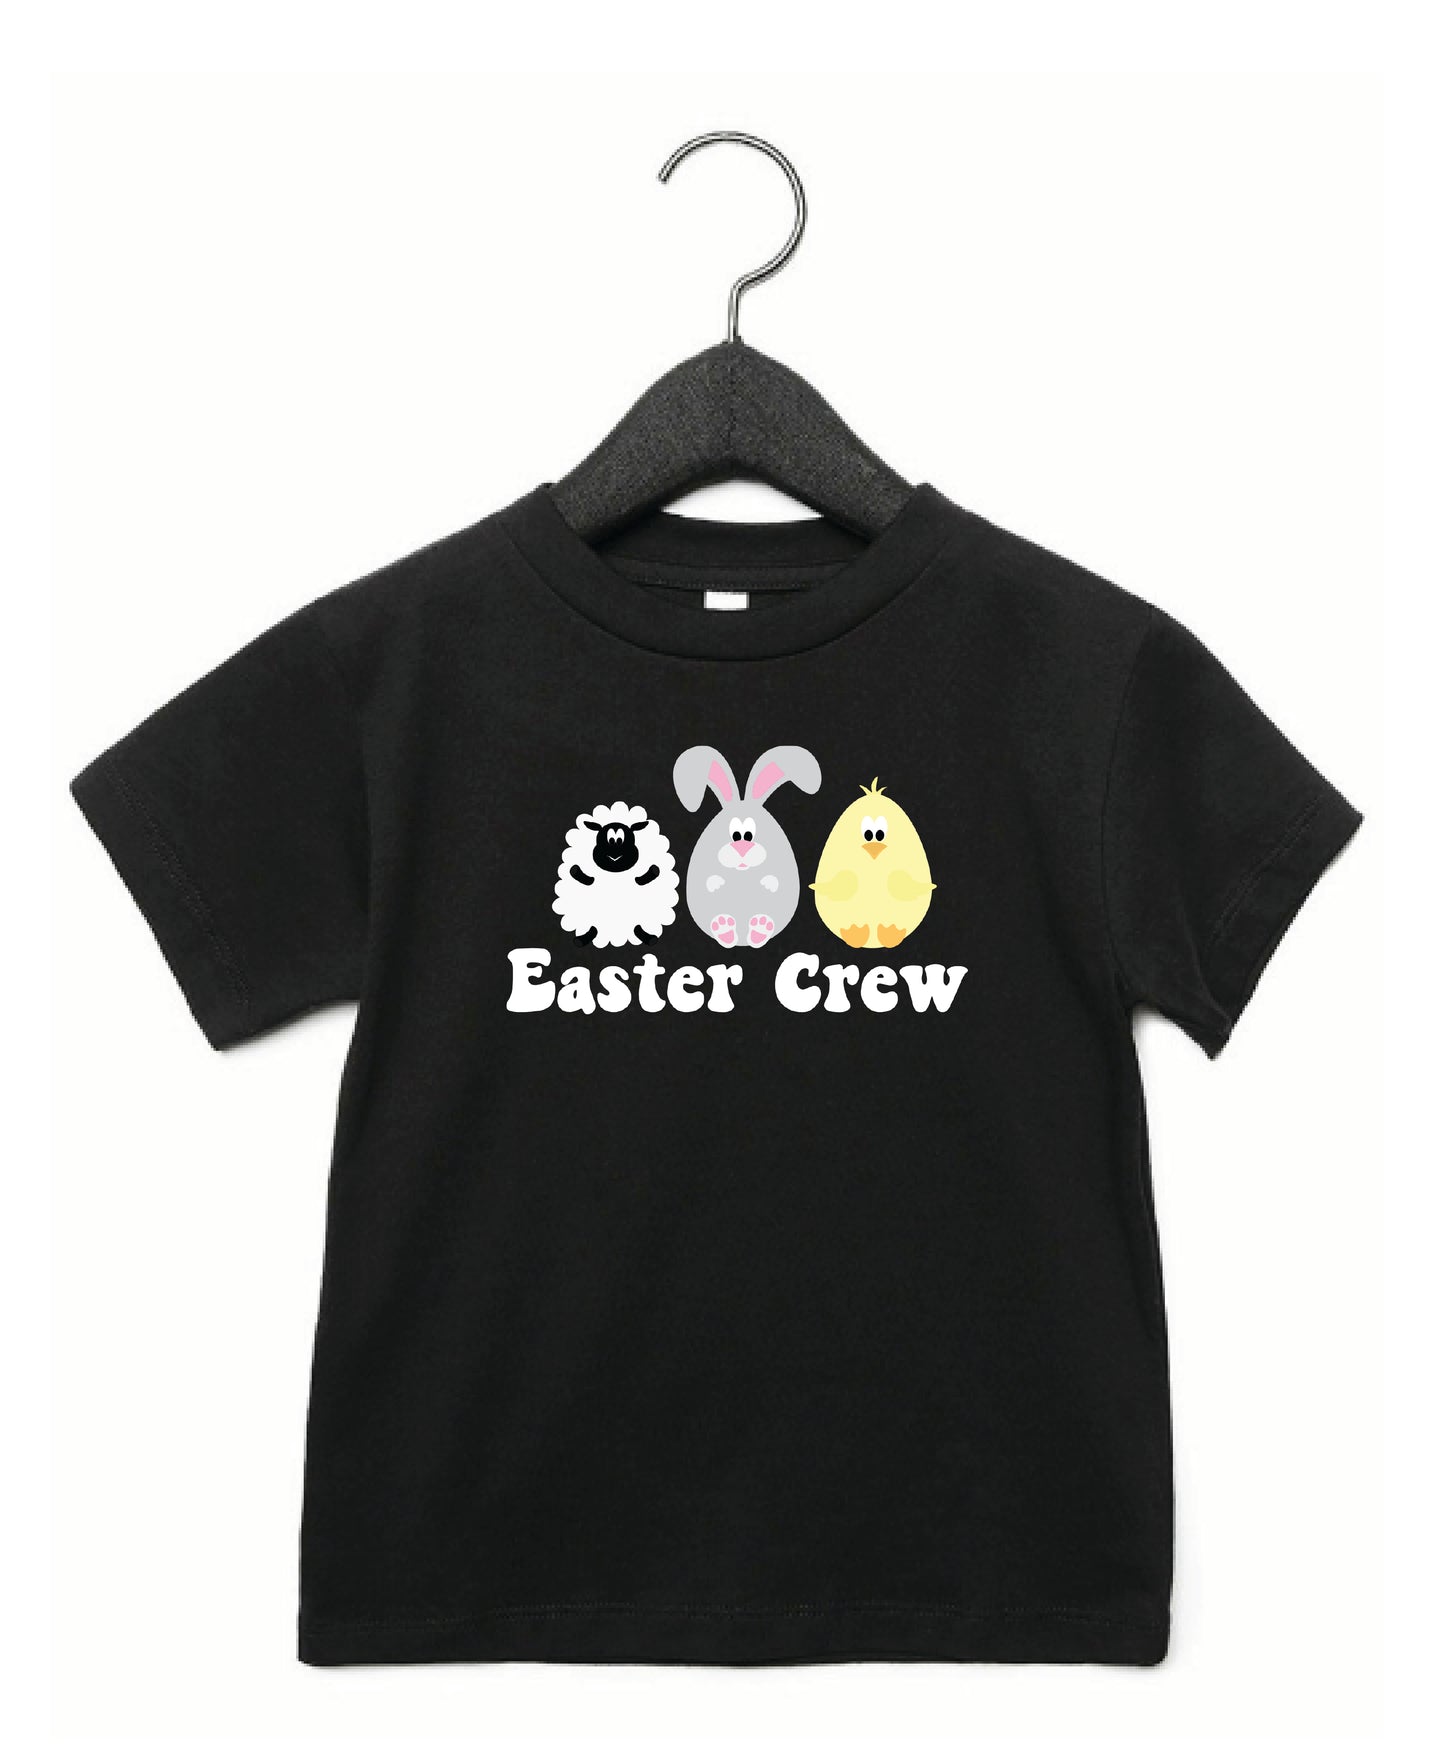 Easter Crew Shirts